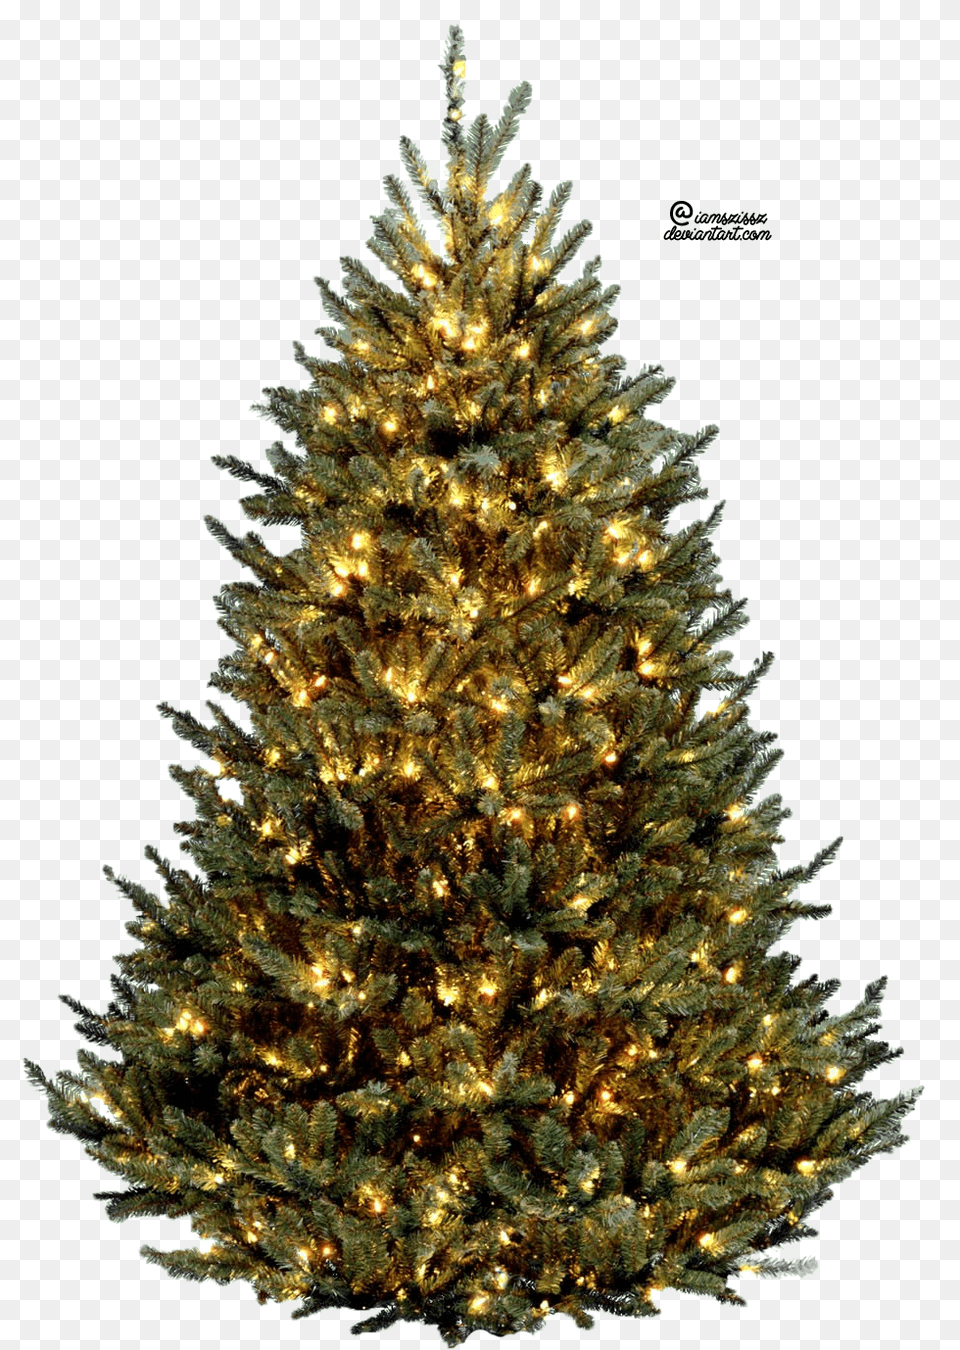 Christmas Tree Download Cliparts Only Clipground Christmas Tree With Lights, Plant, Christmas Decorations, Festival, Christmas Tree Free Png